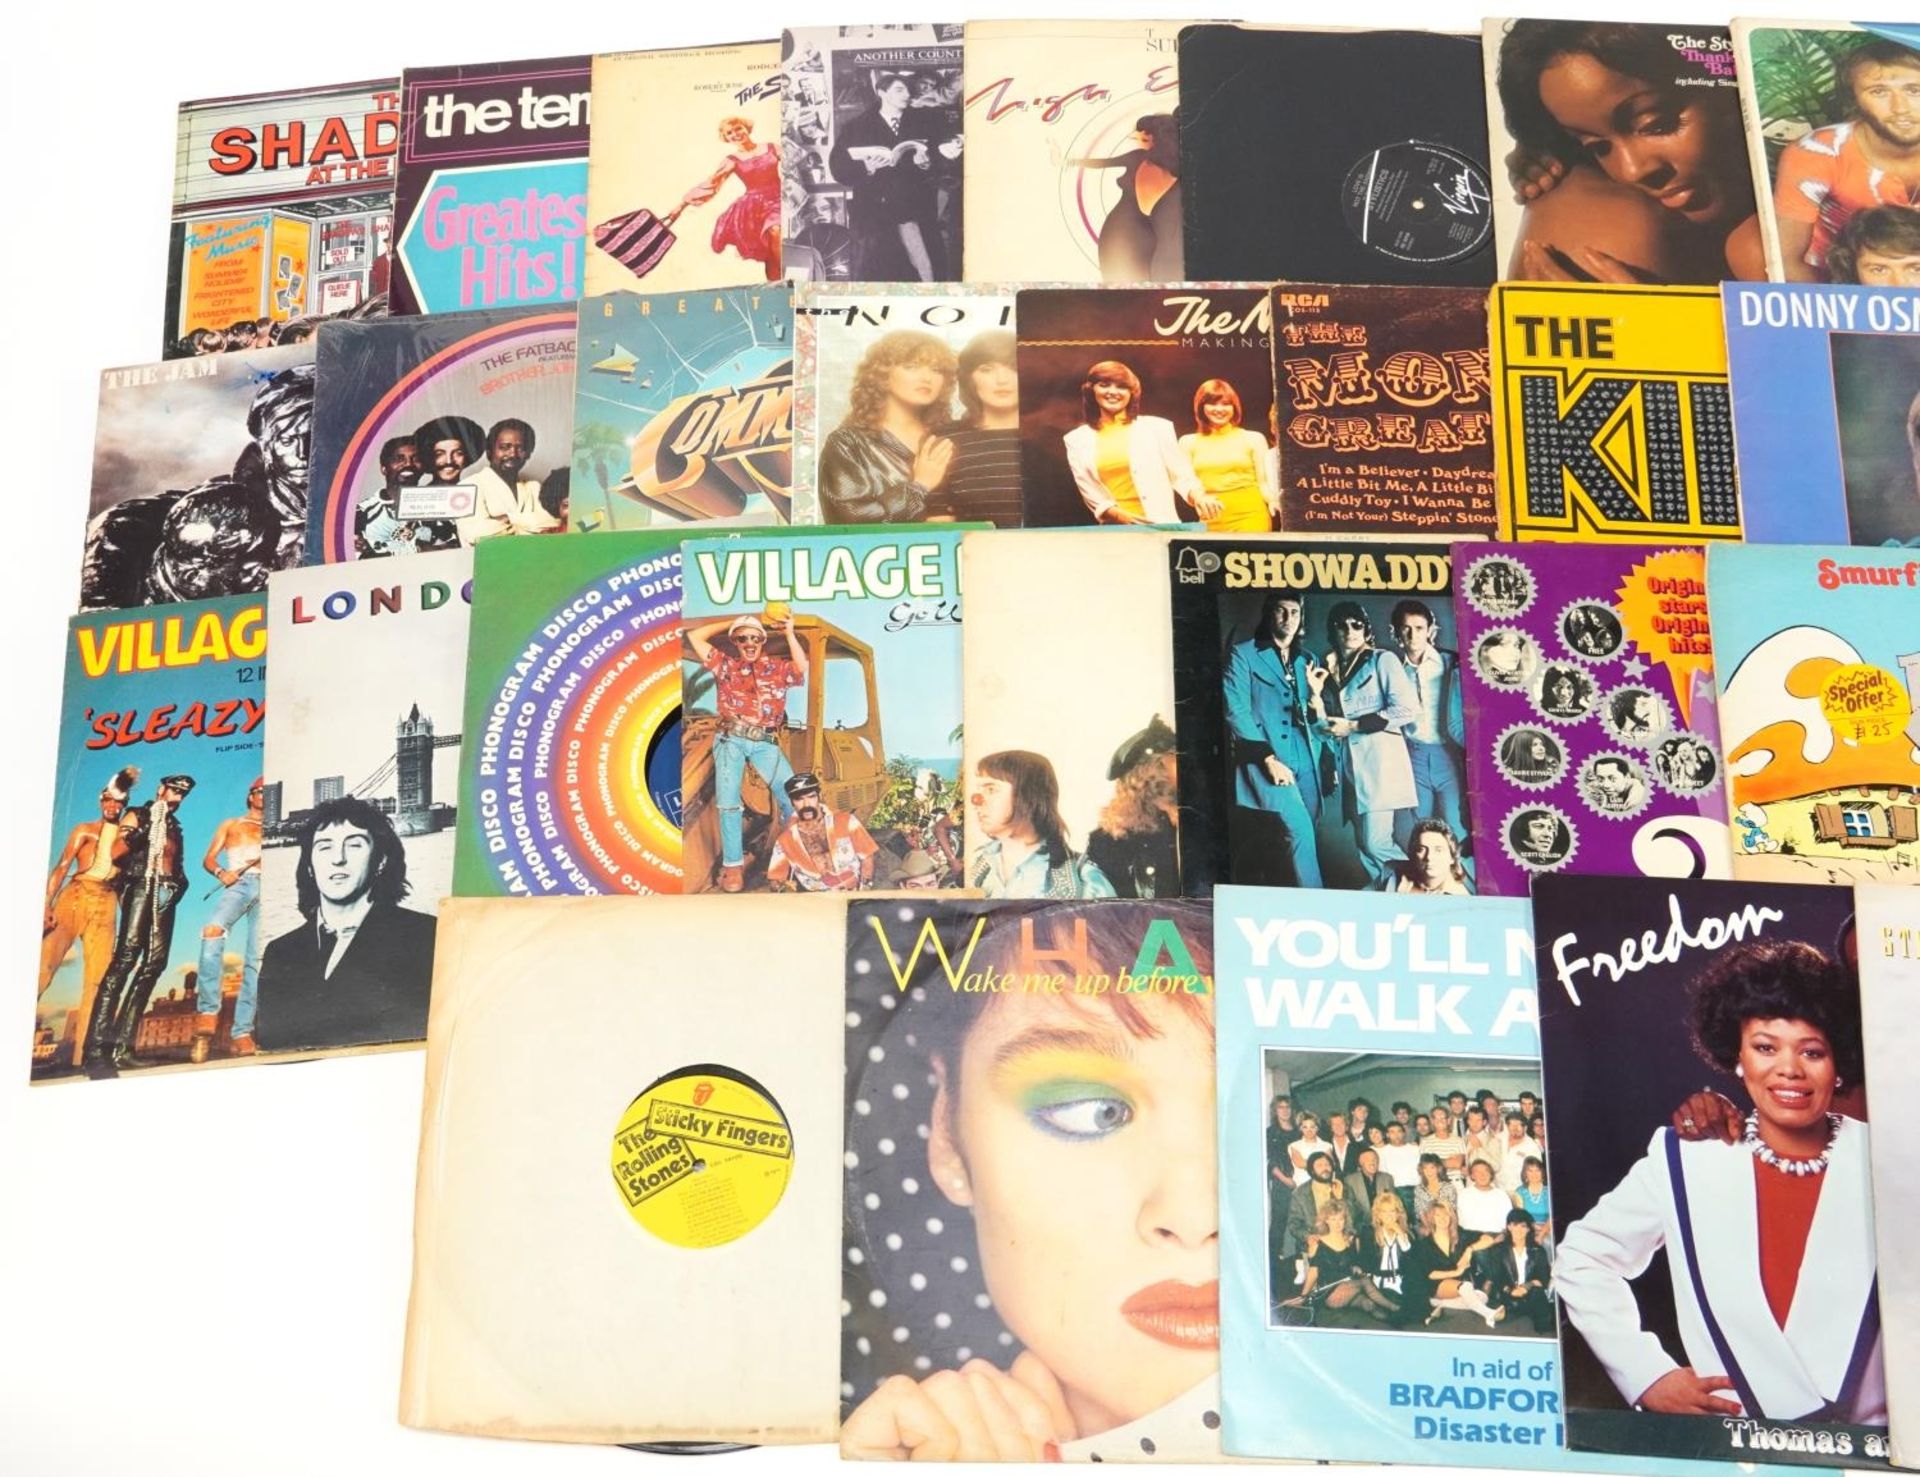 Vinyl LP records including Wings, Shakin' Stevens, Showaddywaddy, Stevie Wonder, The Jam and The - Image 2 of 4